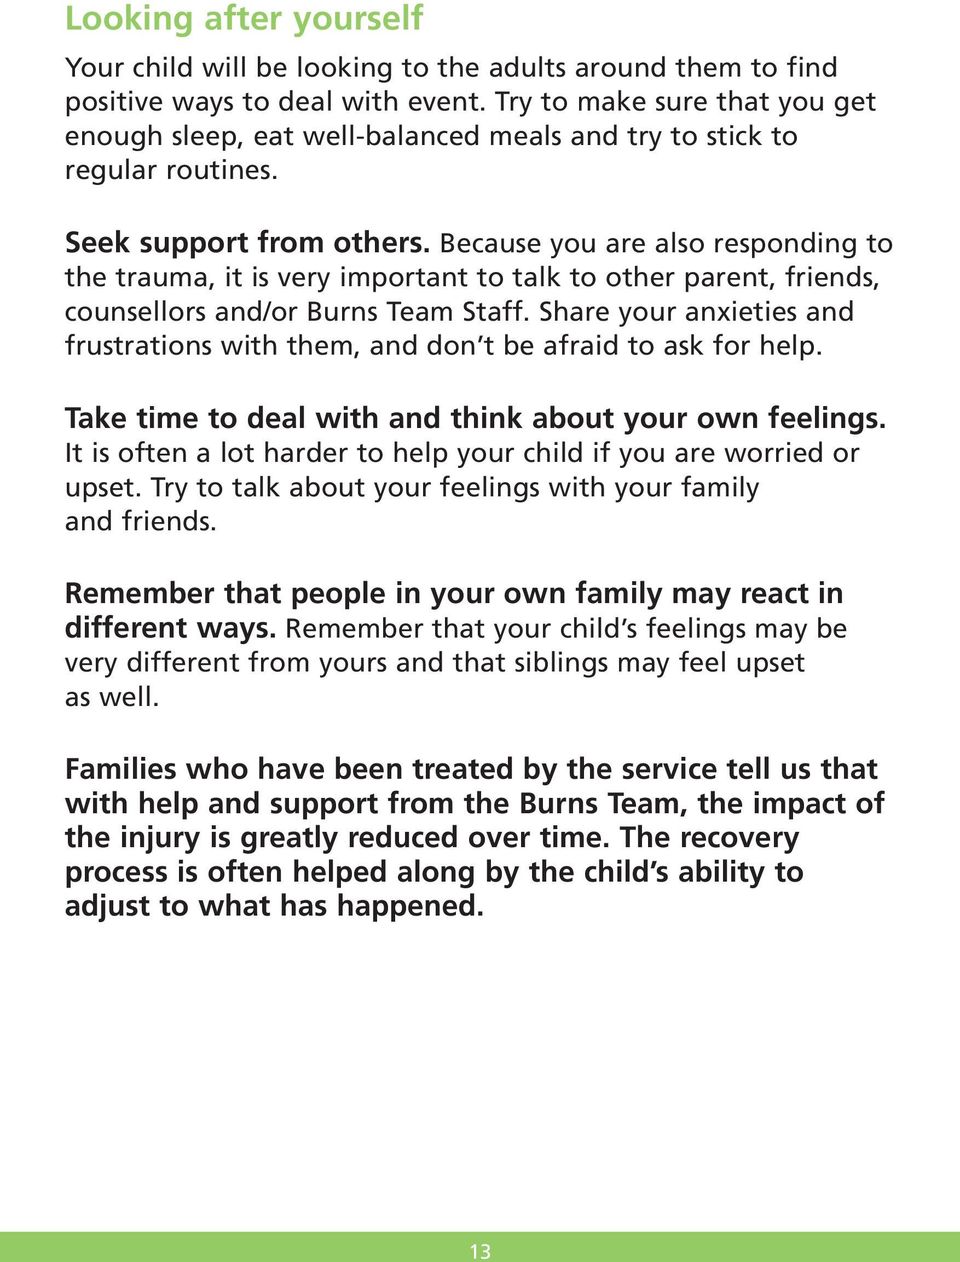 Because you are also responding to the trauma, it is very important to talk to other parent, friends, counsellors and/or Burns Team Staff.